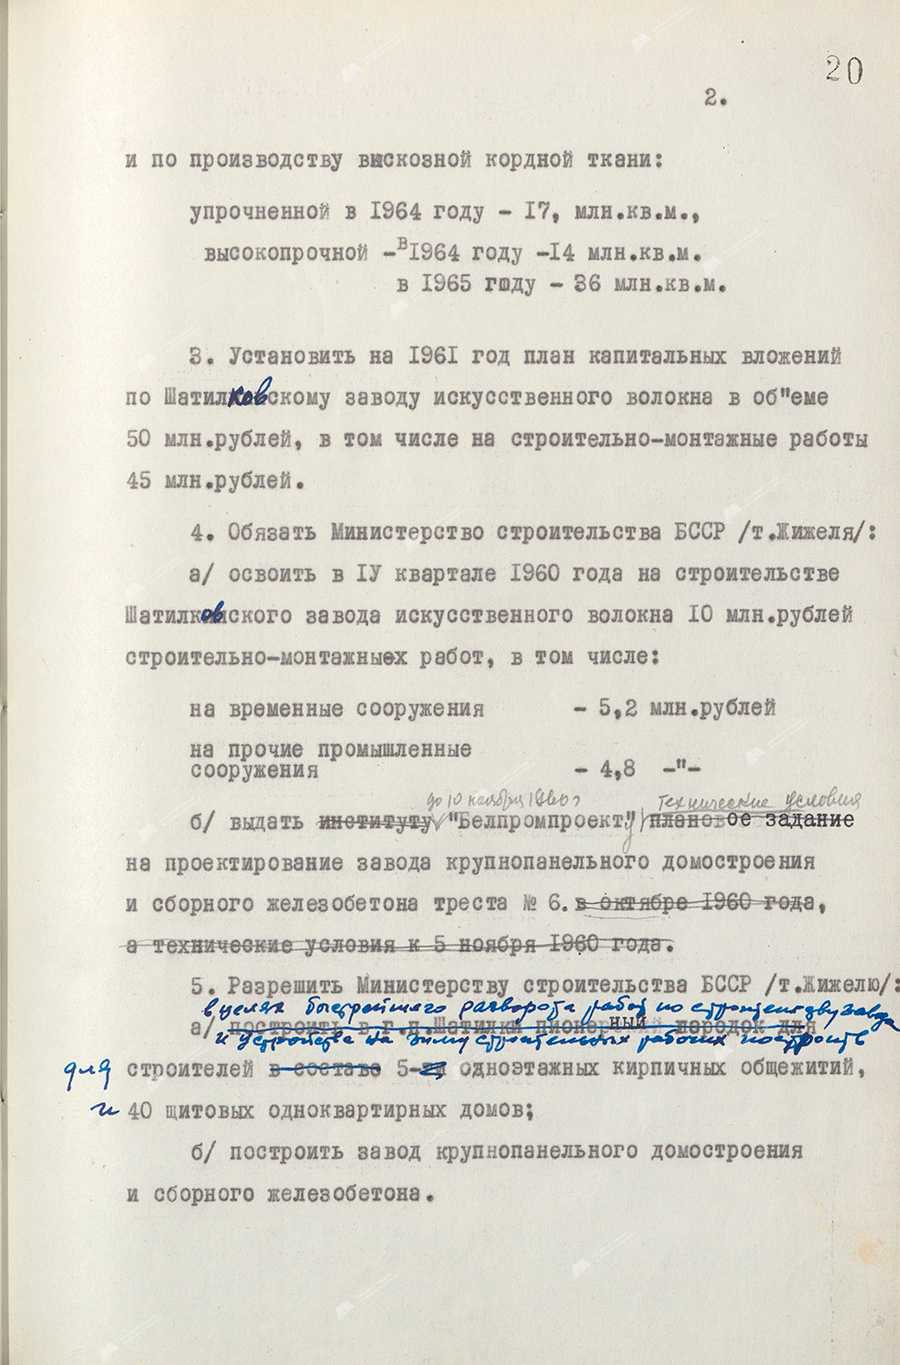 Resolution No. 608 of the Central Committee of the Communist Party of Belarus and the Council of Ministers of the BSSR «On the construction of an artificial fiber plant in the town. Shatilki, Gomel region»-с. 1